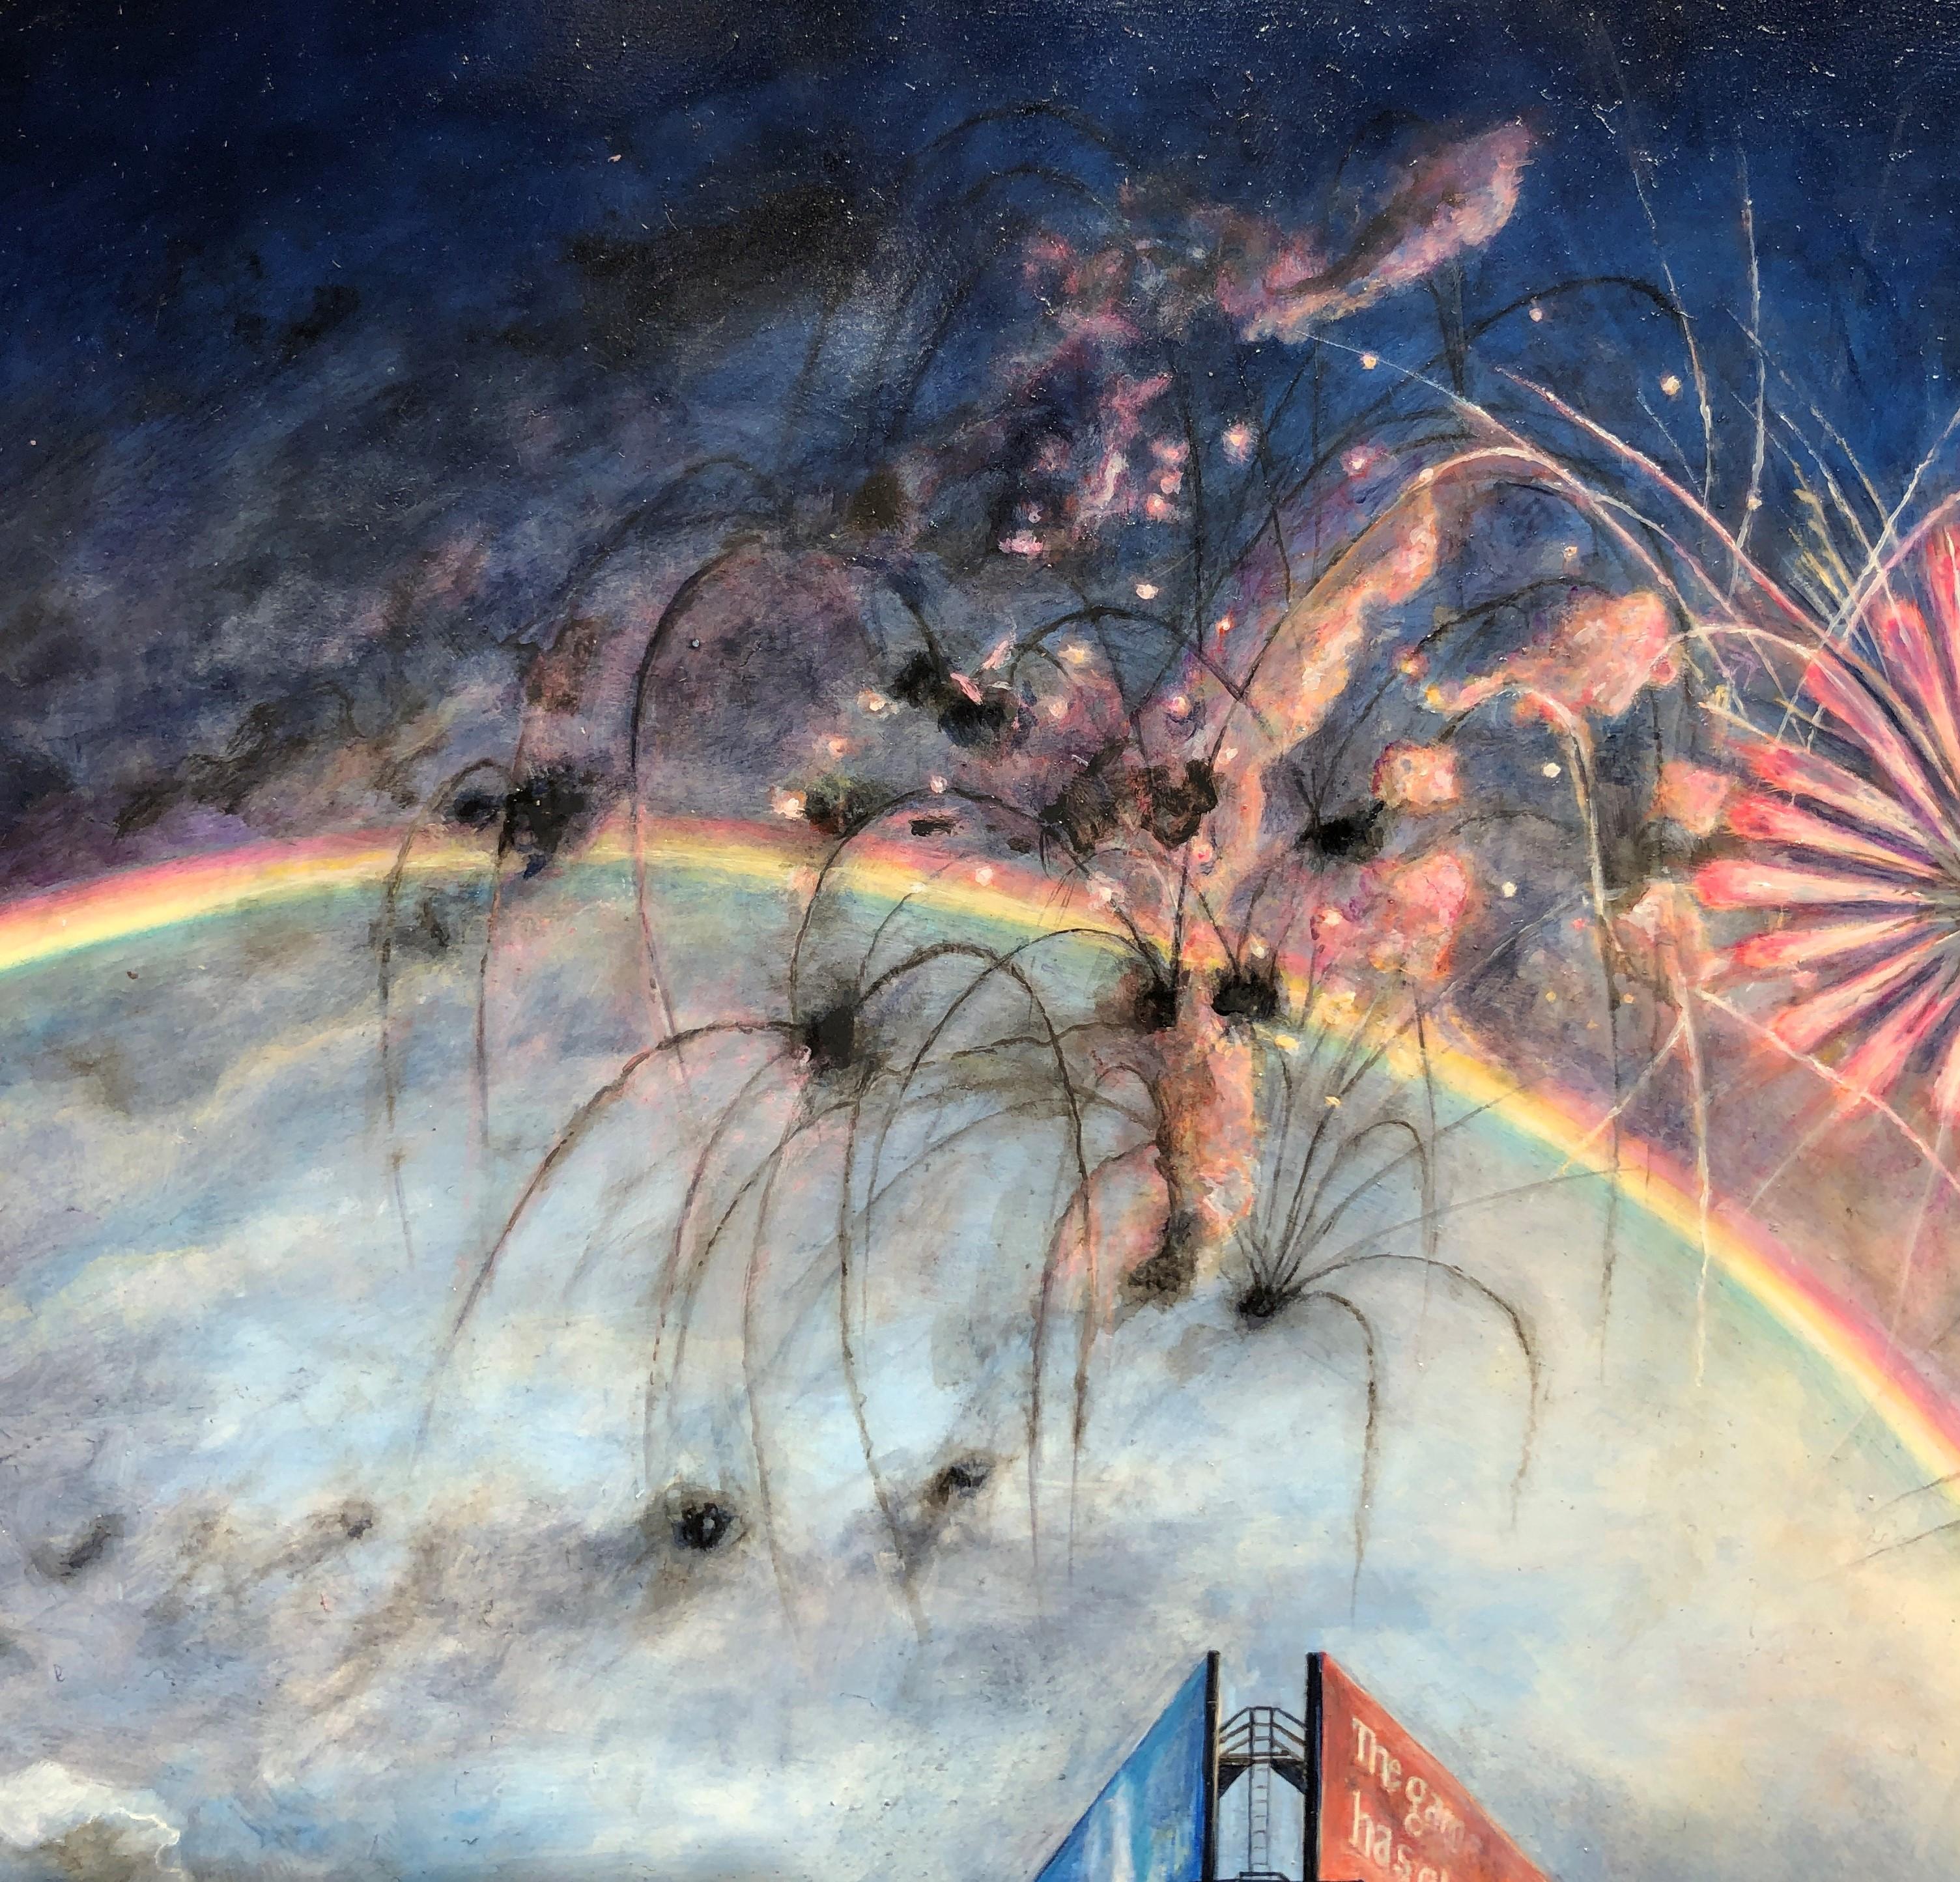 True North - Orientation, Surreal Sky with Billboard, Rainbow and Fireworks - Contemporary Painting by Mark Bowers